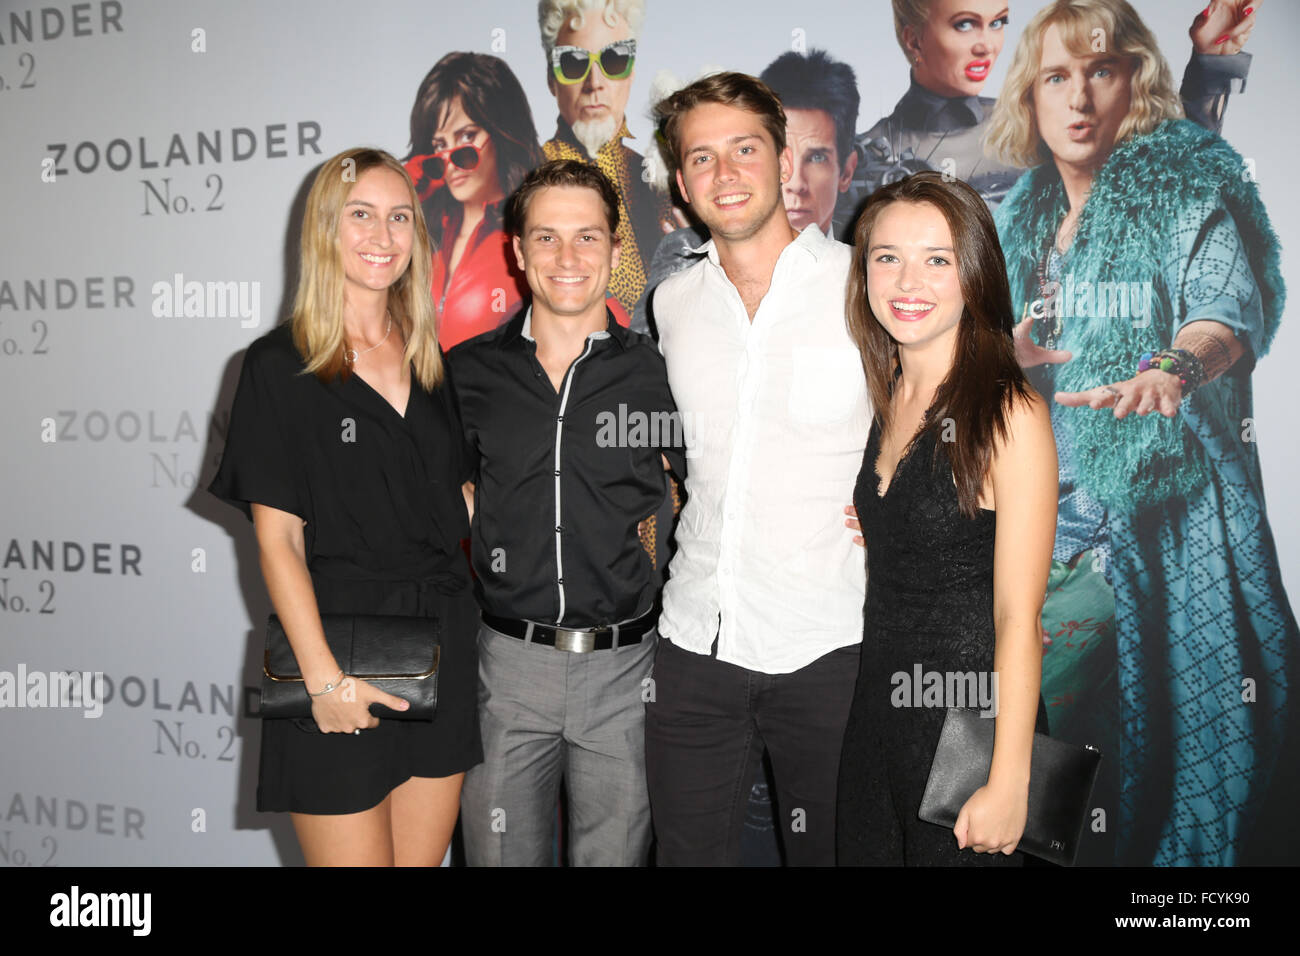 Sydney, Australia. 26 January 2016. Celebrities arrived on the red carpet for the comedy Zoolander No. 2 at the State Theatre, 49 Market Street. Pictured: Jake Speer and girlfriend, Isaac Brown and Philippa Northeast. Credit: Richard Milnes/Alamy Live News Stock Photo